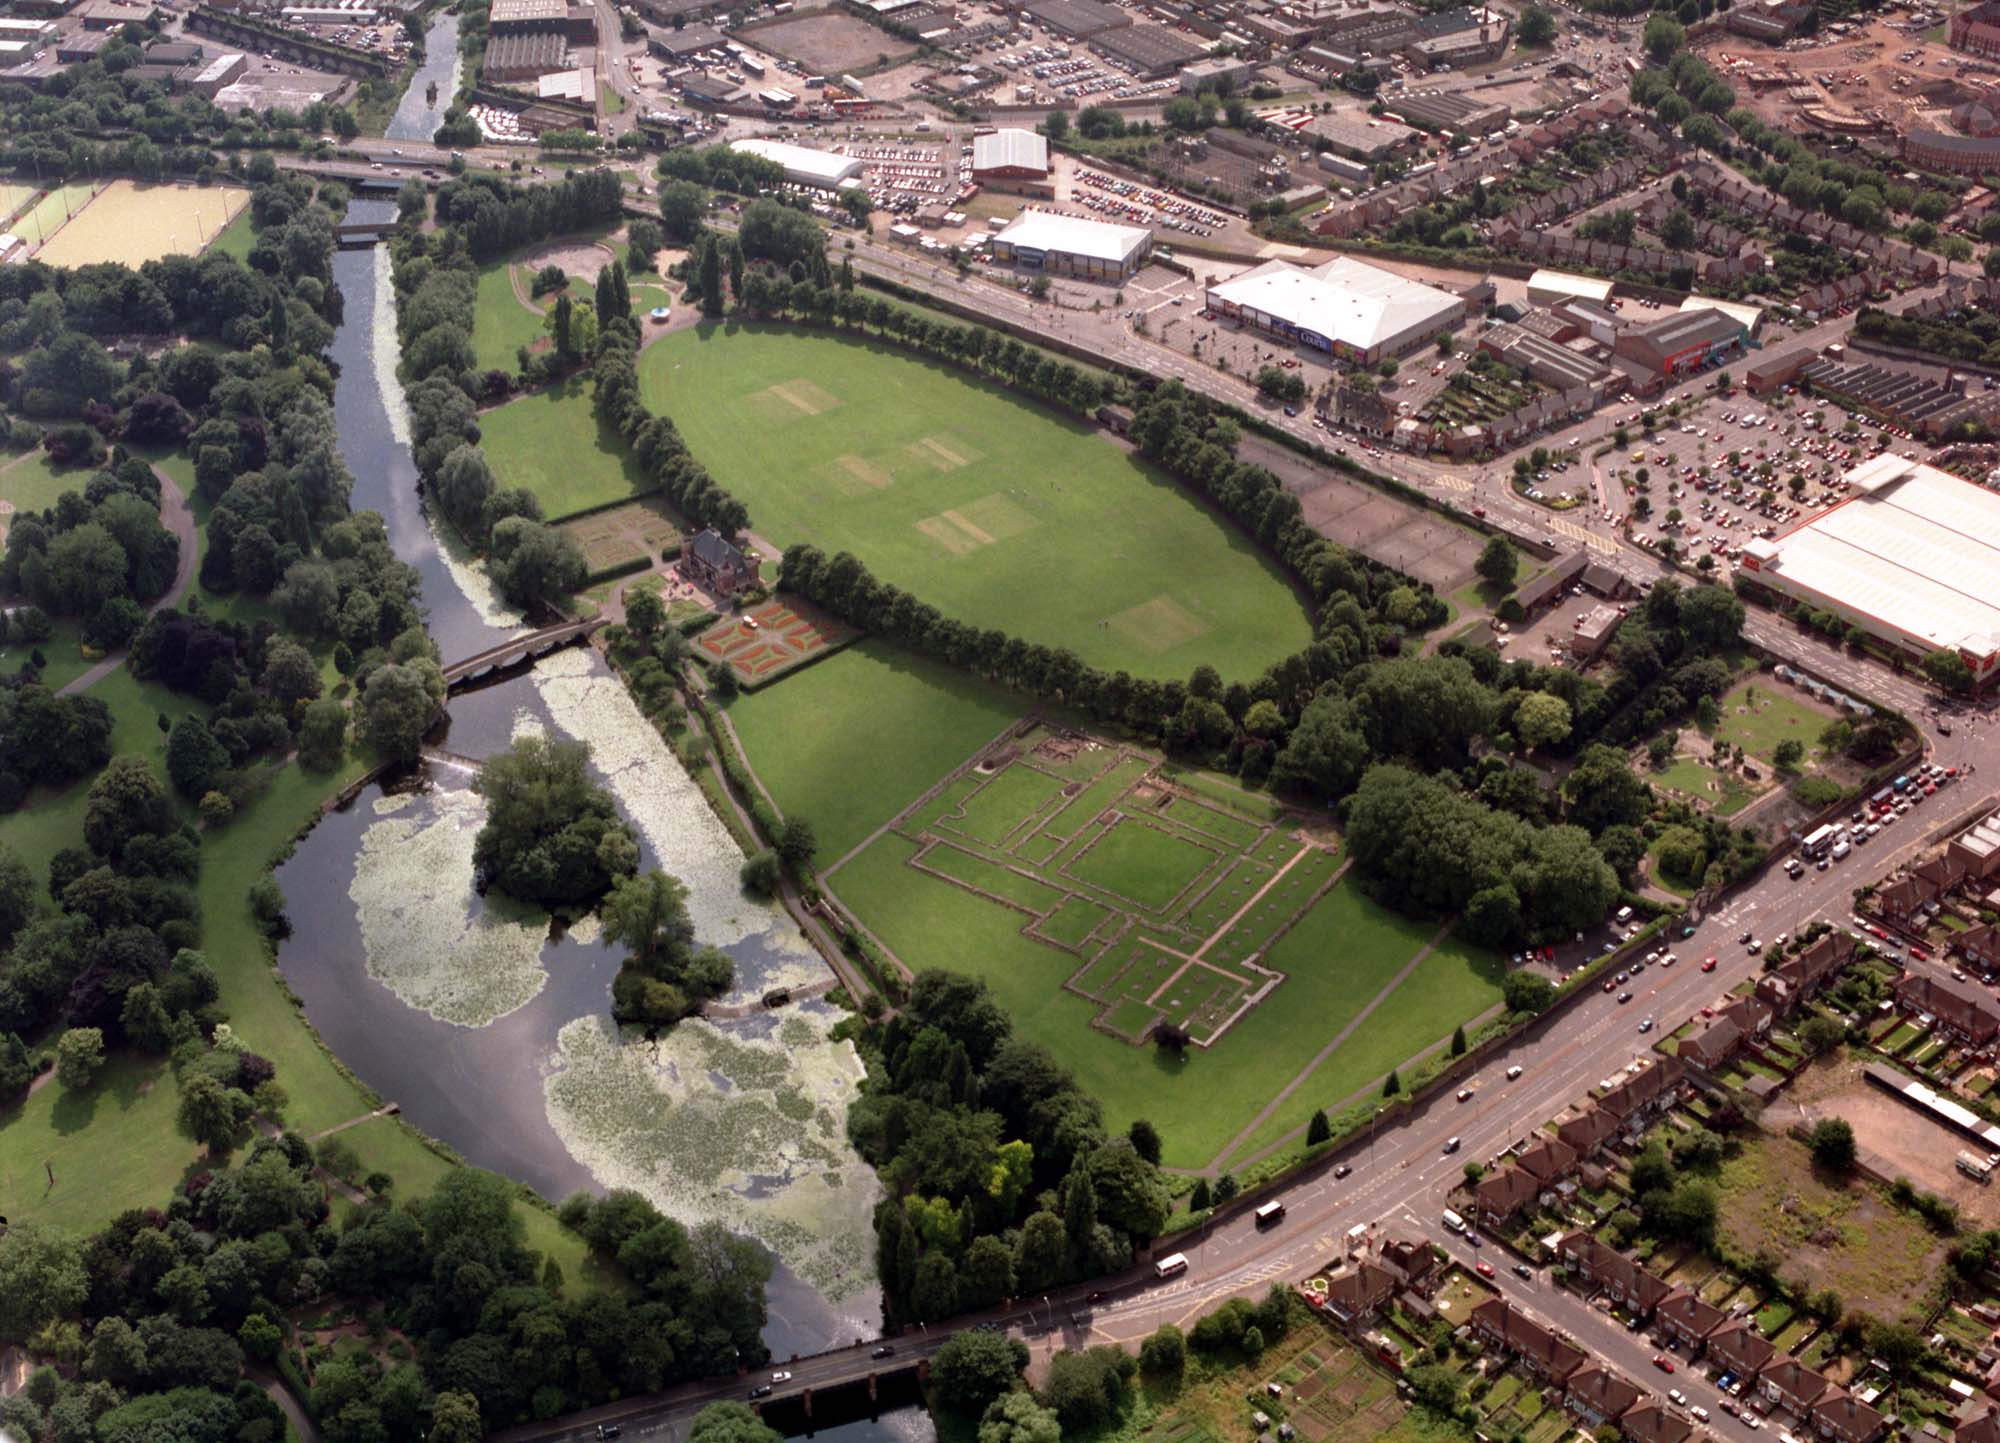 An aerial view of Abbey Park showing The Oval next to the ruins of Leicester Abbey, 2003 - 